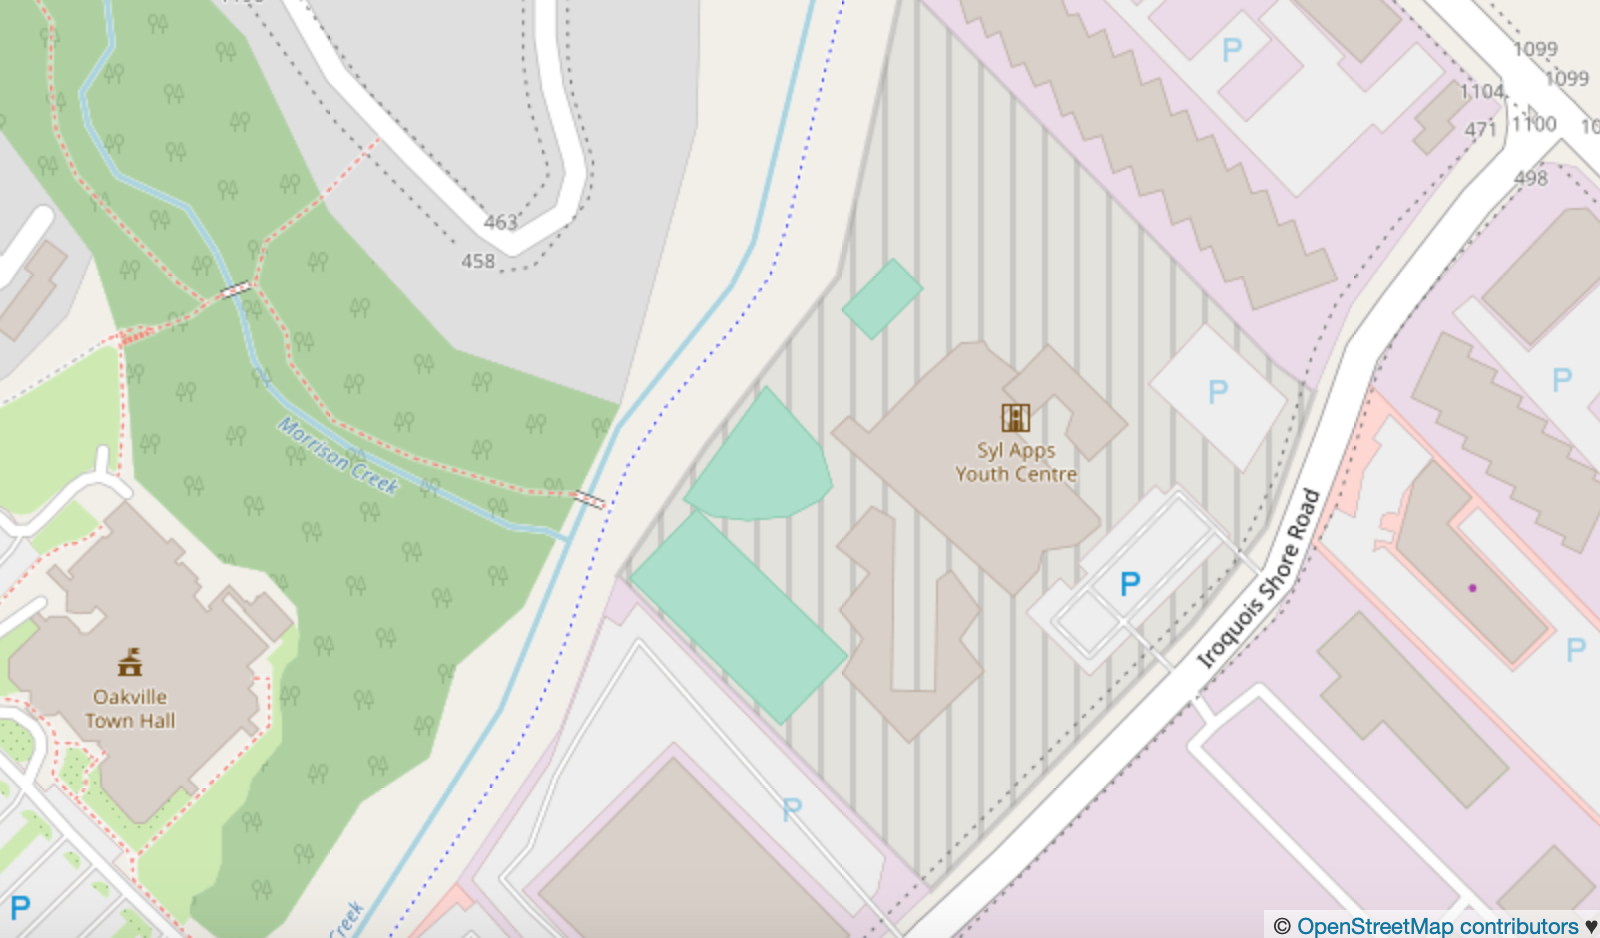 Syl Apps Youth Centre | © OpenStreetMap contributors CC BY-SA 2.0